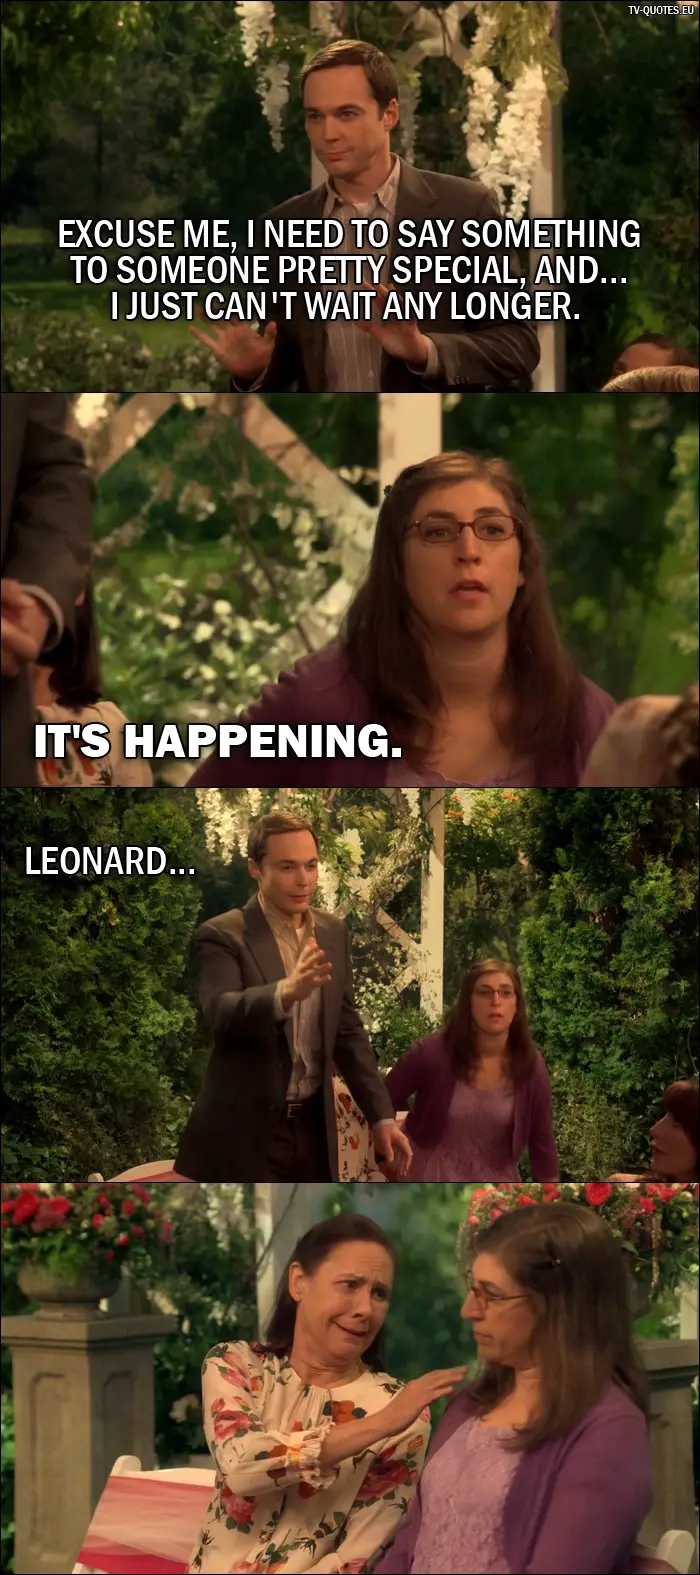 The Big Bang Theory Quote from 10x01 - Sheldon Cooper: Excuse me, I need to say something to someone pretty special, and... I just can't wait any longer. Amy Farrah Fowler: It's happening. Sheldon Cooper: Leonard...